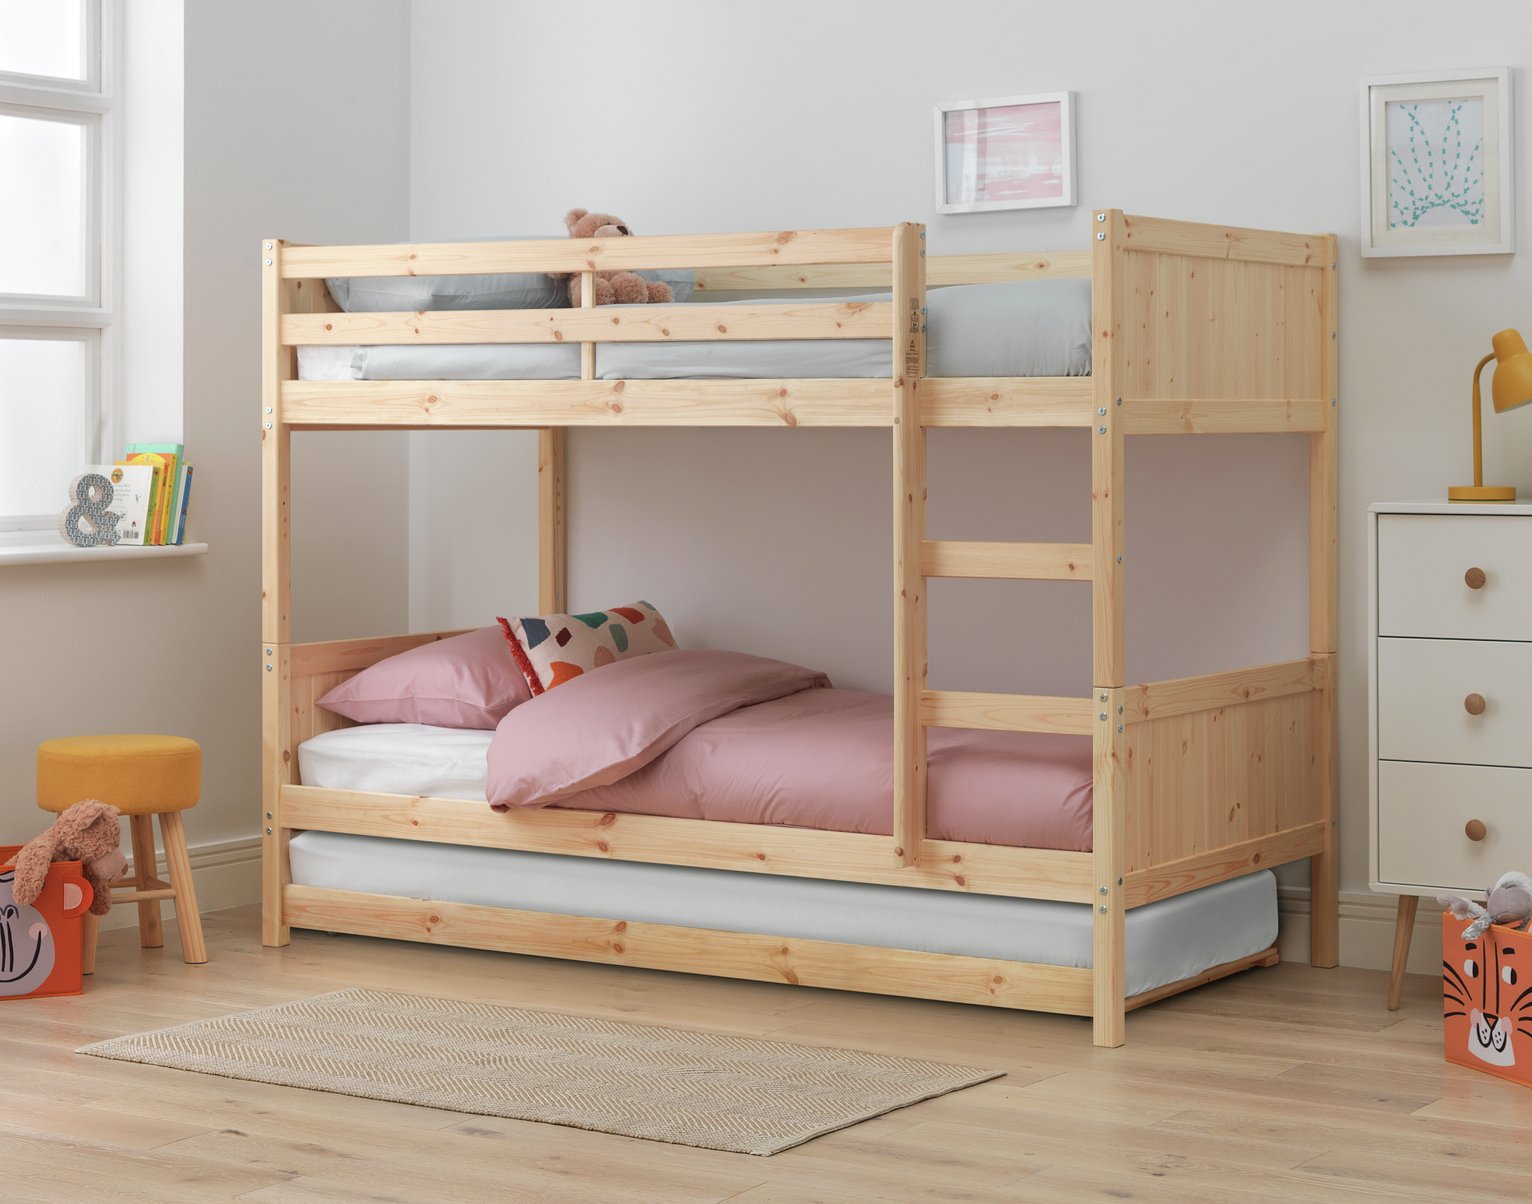 Argos Home Detachable Pine Bunk Bed Frame with Trundle